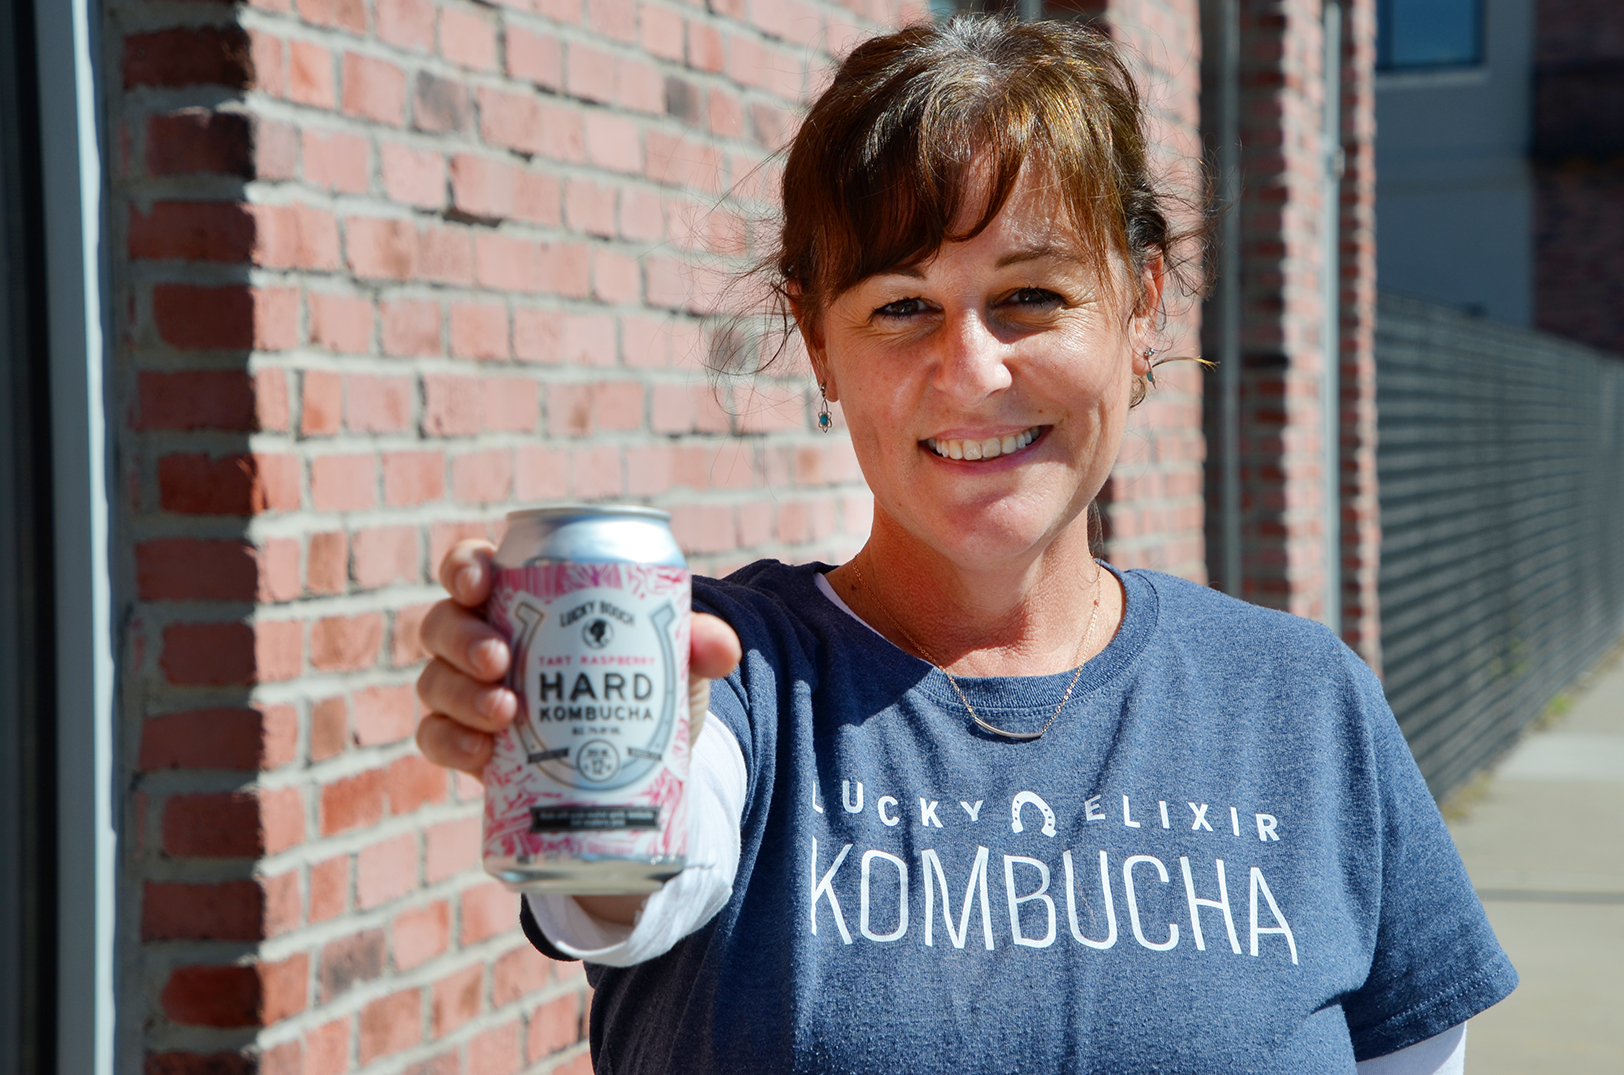 North KC’s Brewkery pours new line of alcoholic kombucha, tapping brand’s inner spirits